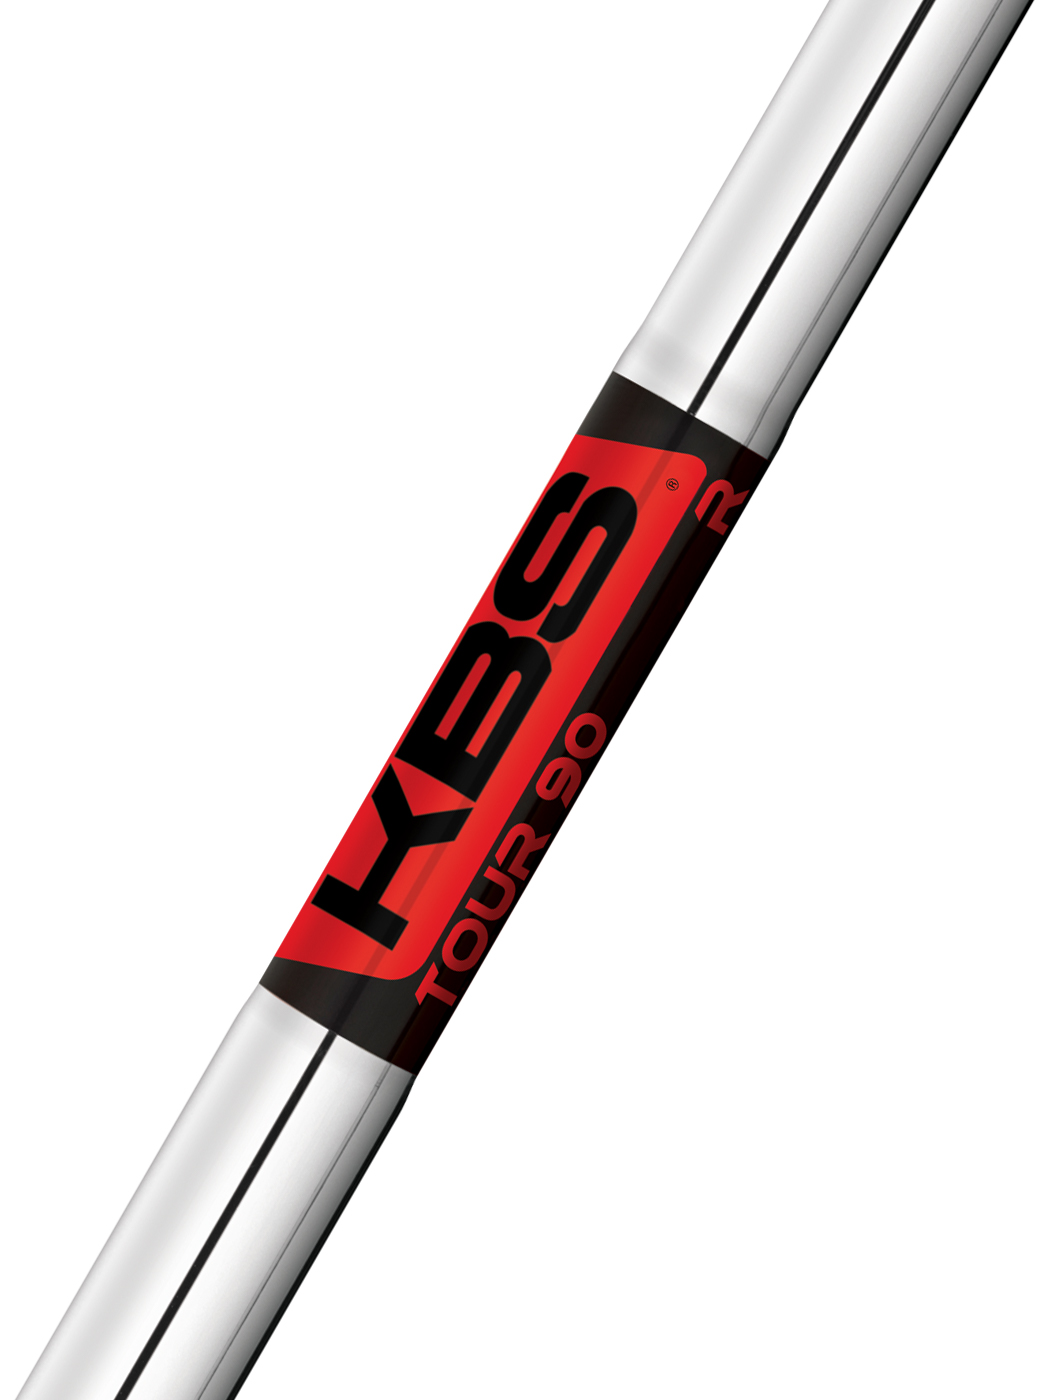 Kbs Tour 90 Shaft Review